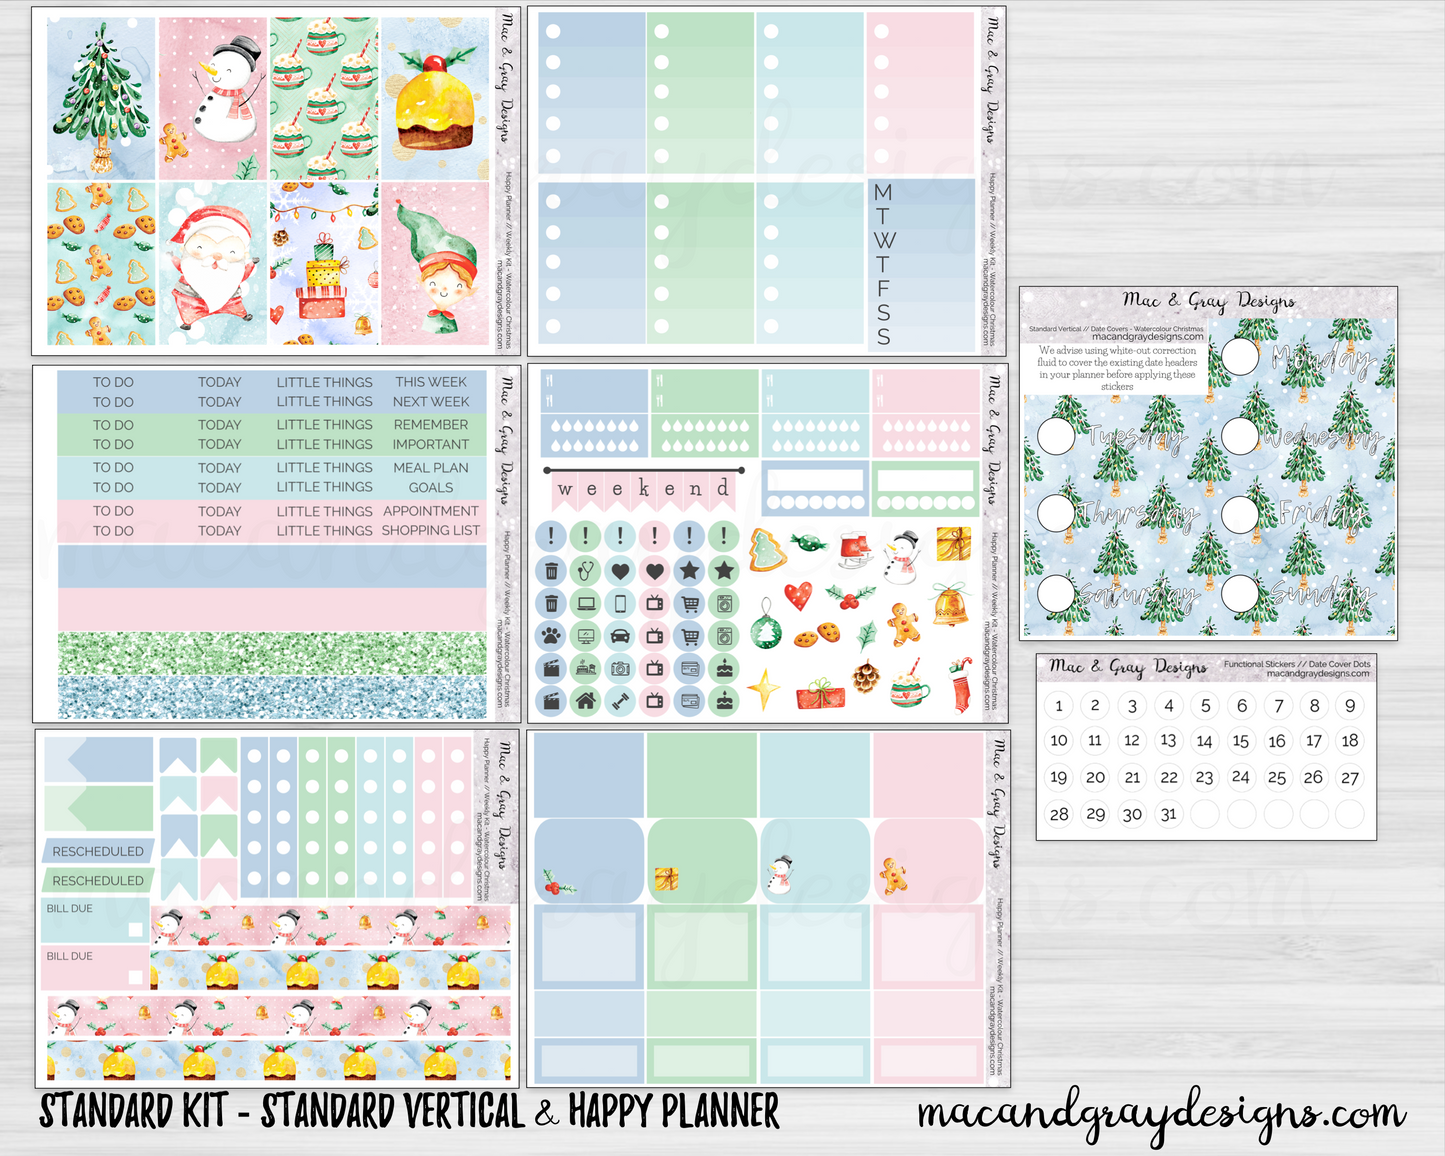 Watercolor Kit, Deluxe Kit (Glossy Planner Stickers)